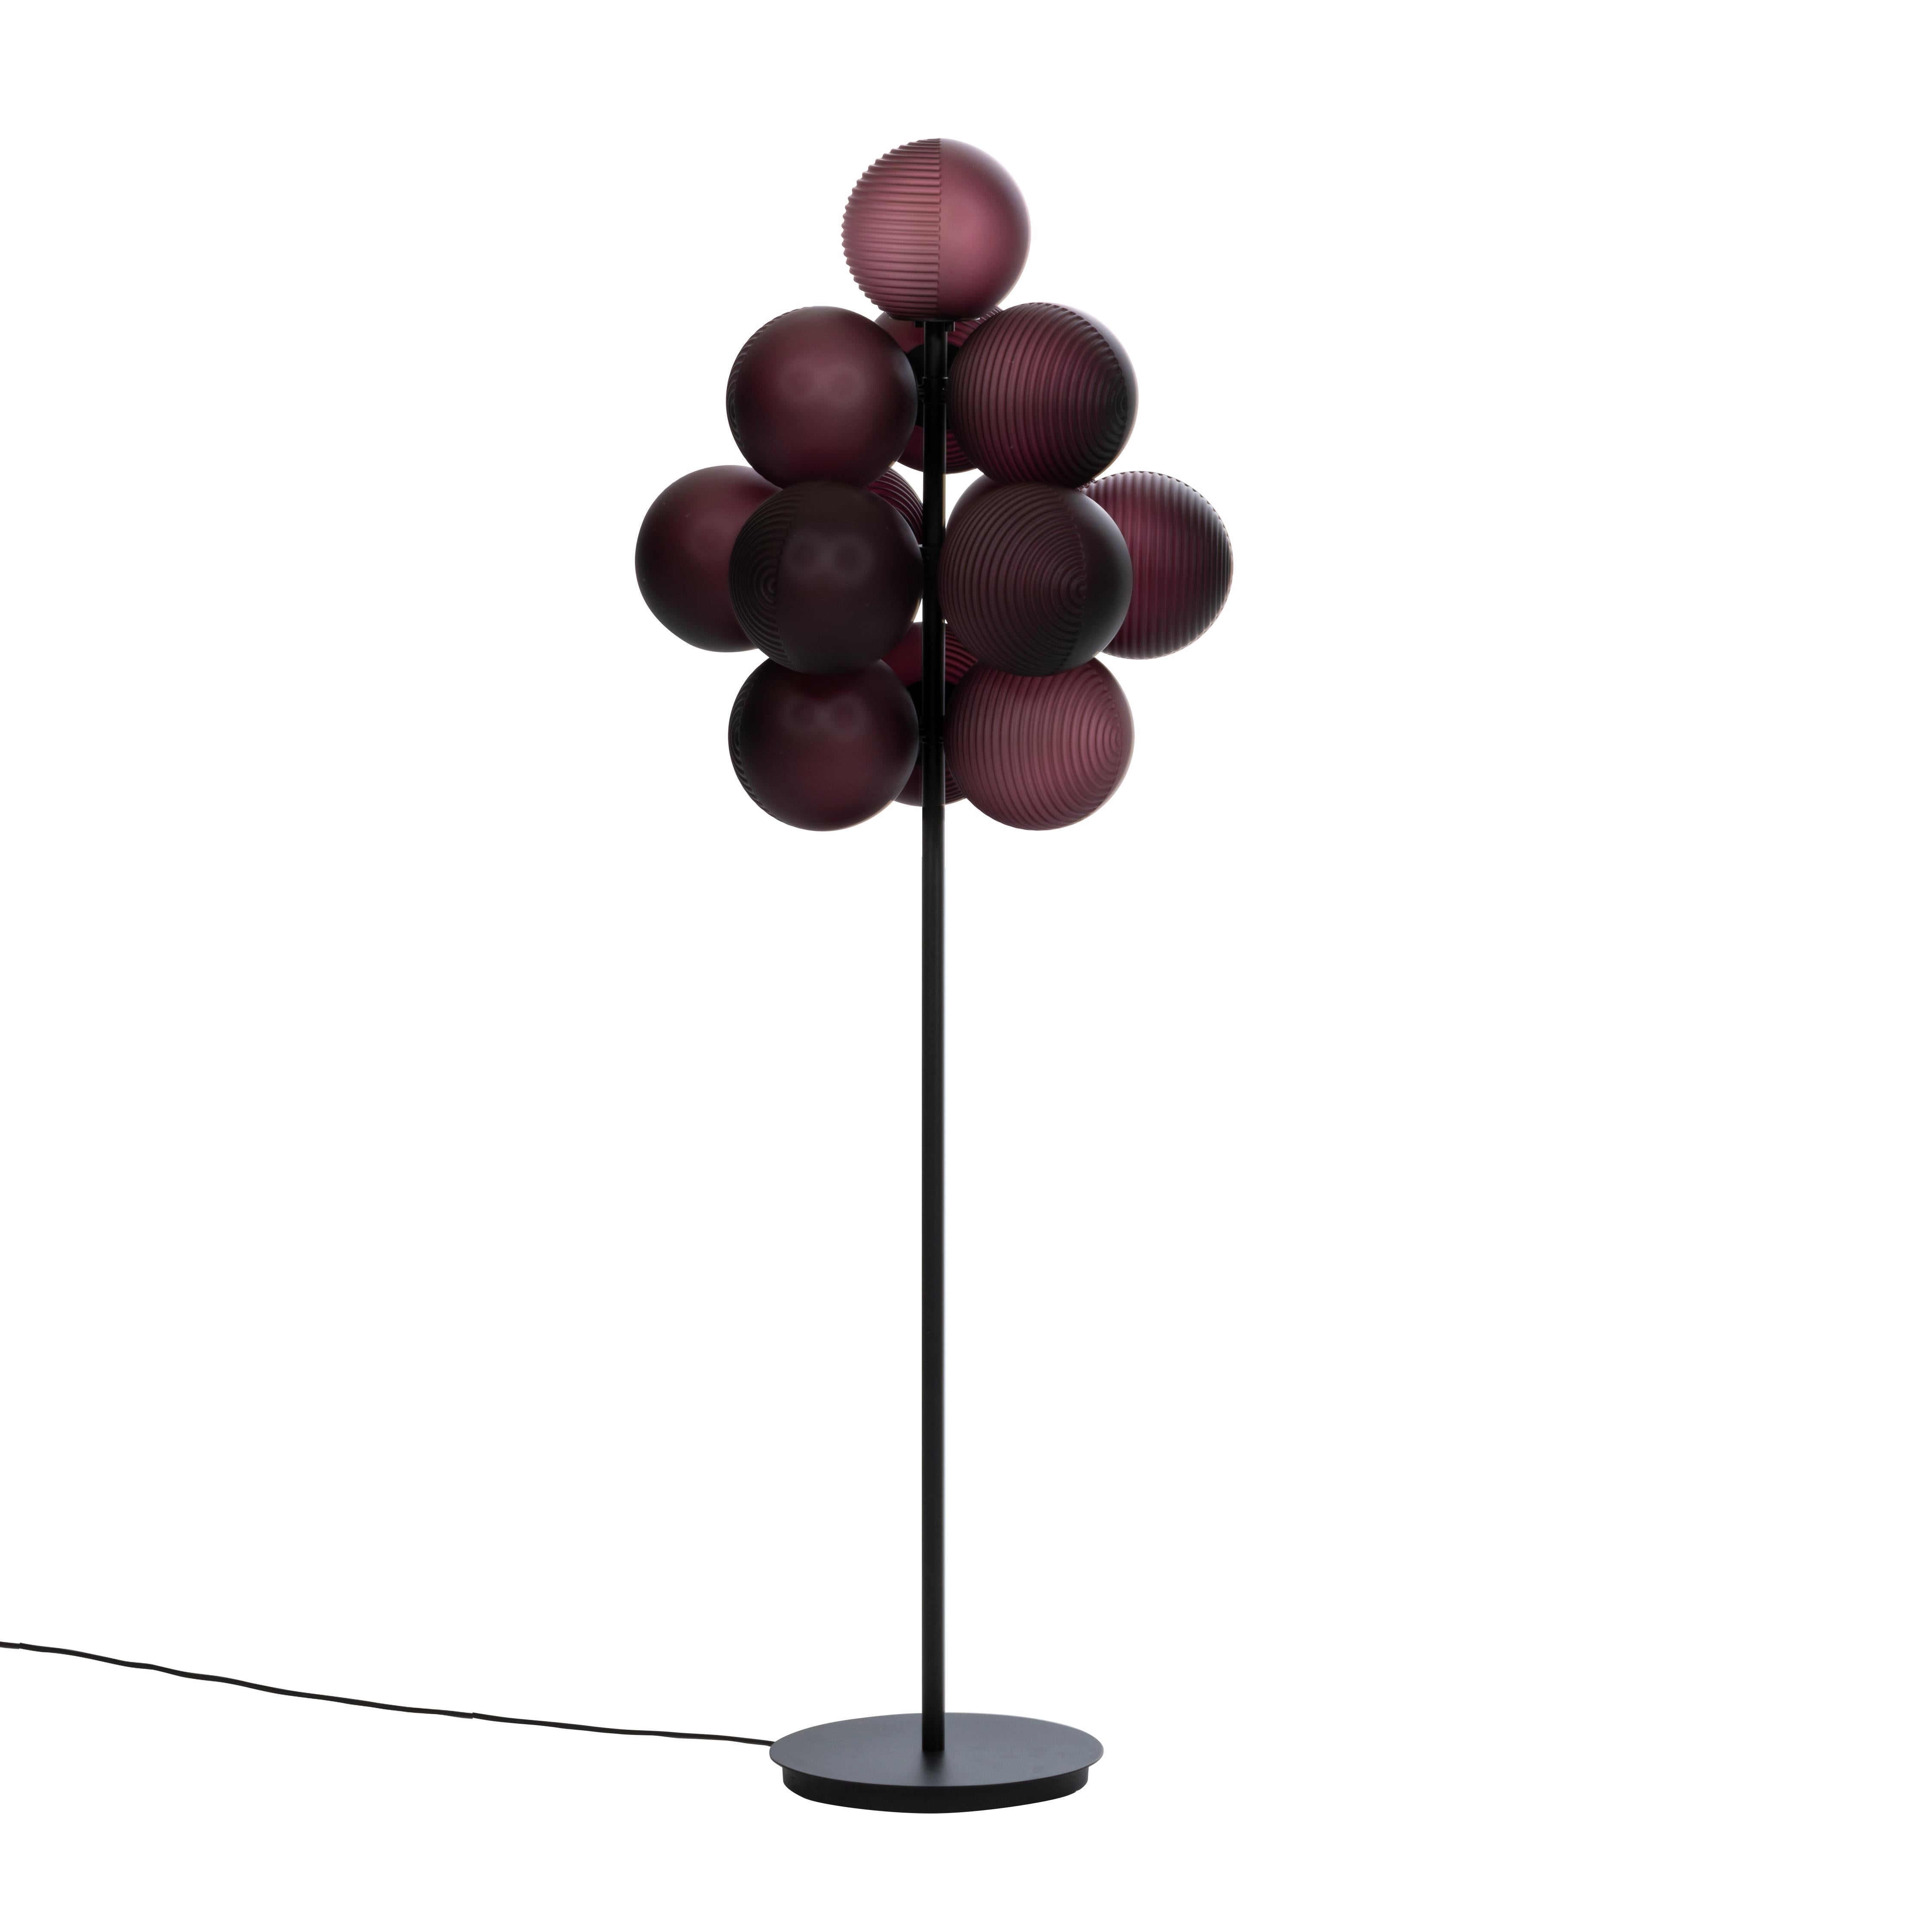 Stellar grape big aubergine acetato black floor light by Pulpo.
Dimensions: D61 x H158 cm.
Materials: handblown glass coloured, powder coated steel.

Also available in different finishes. Height can be customised. 

Raised up above the clouds